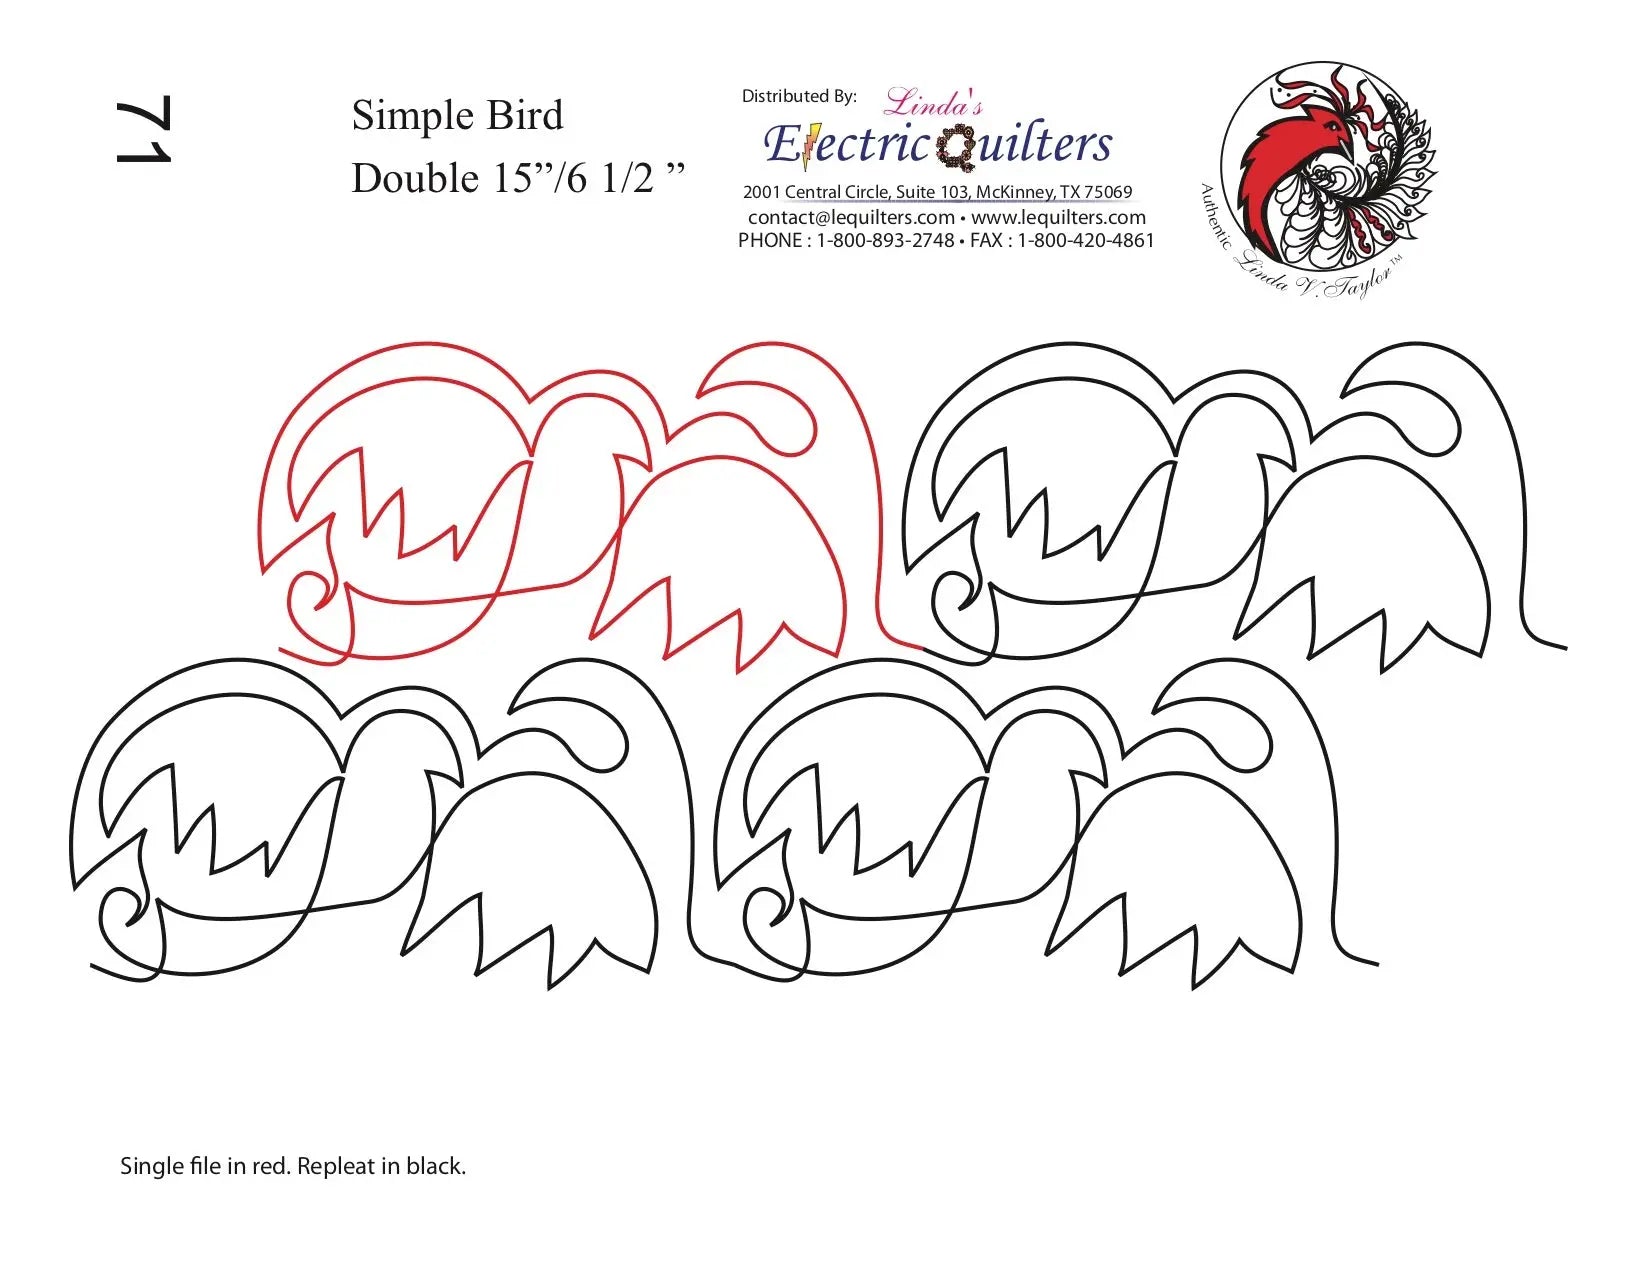 071 Simple Bird Pantograph by Linda V. Taylor - Linda's Electric Quilters